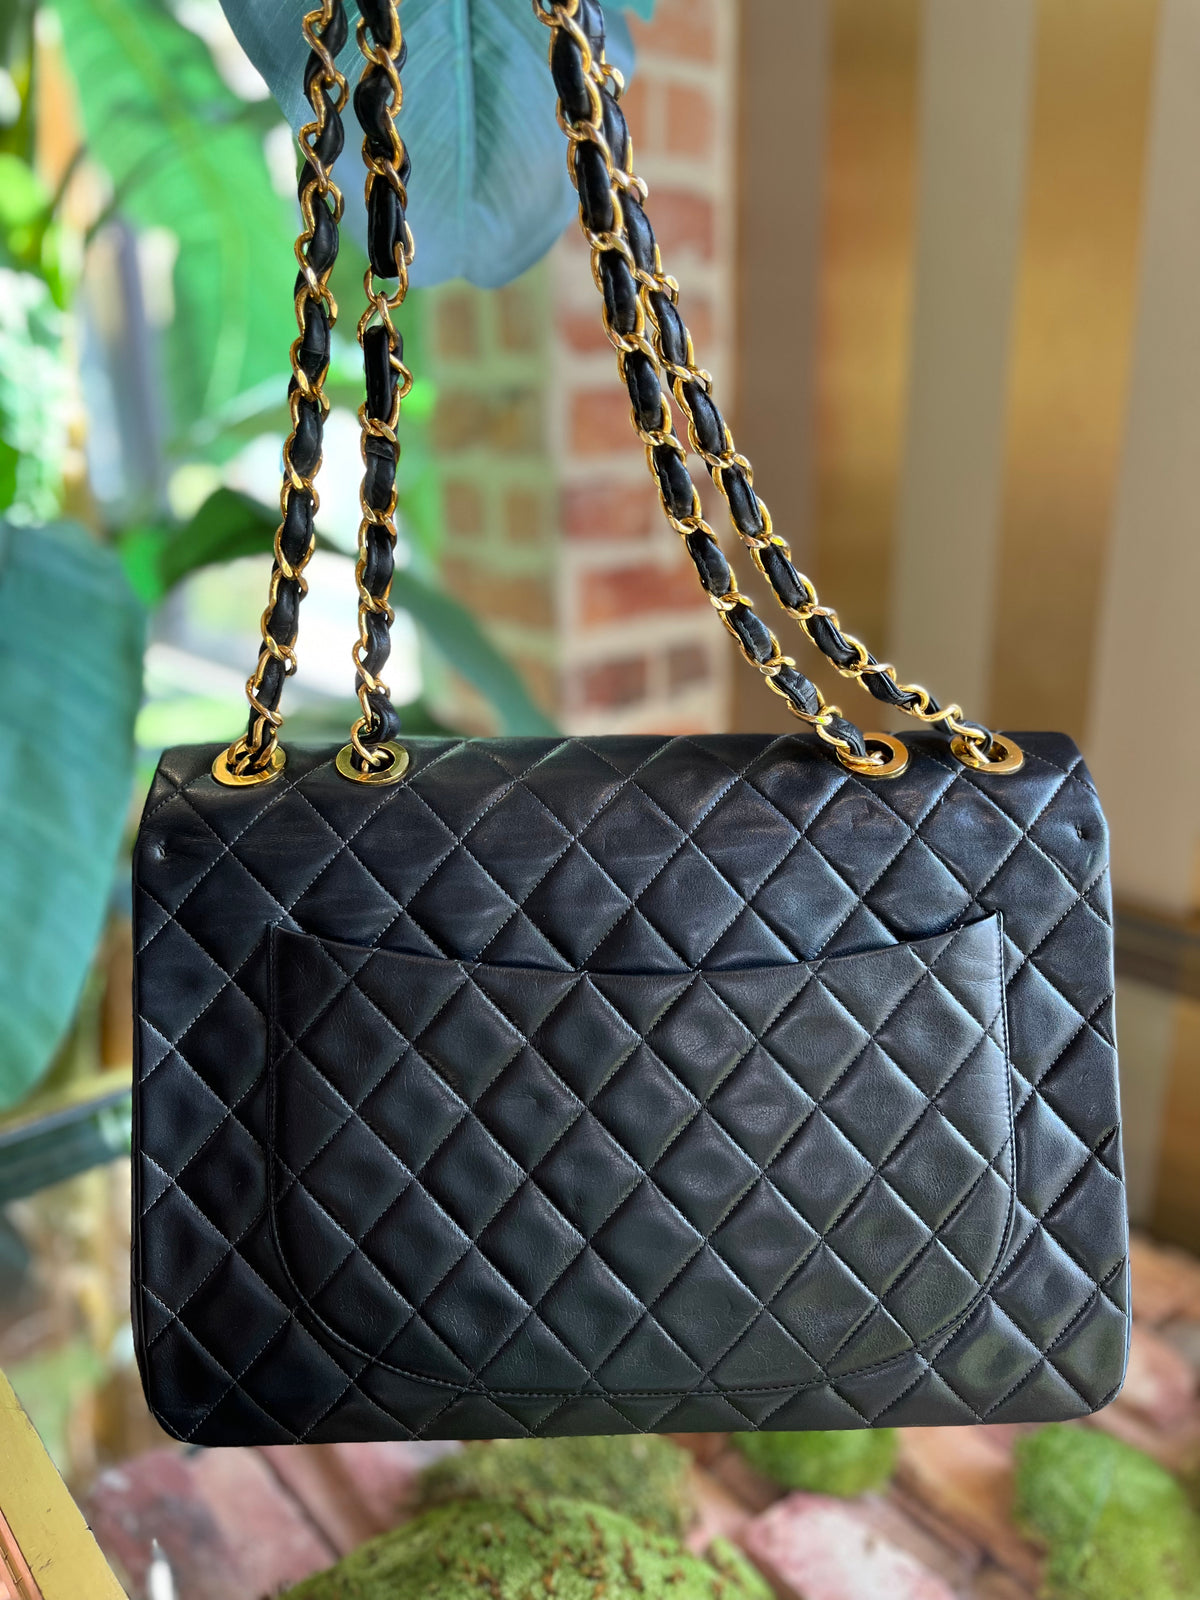 CHANEL Black Quilted Lambskin Leather Classic Maxi Jumbo XL Flap Bag